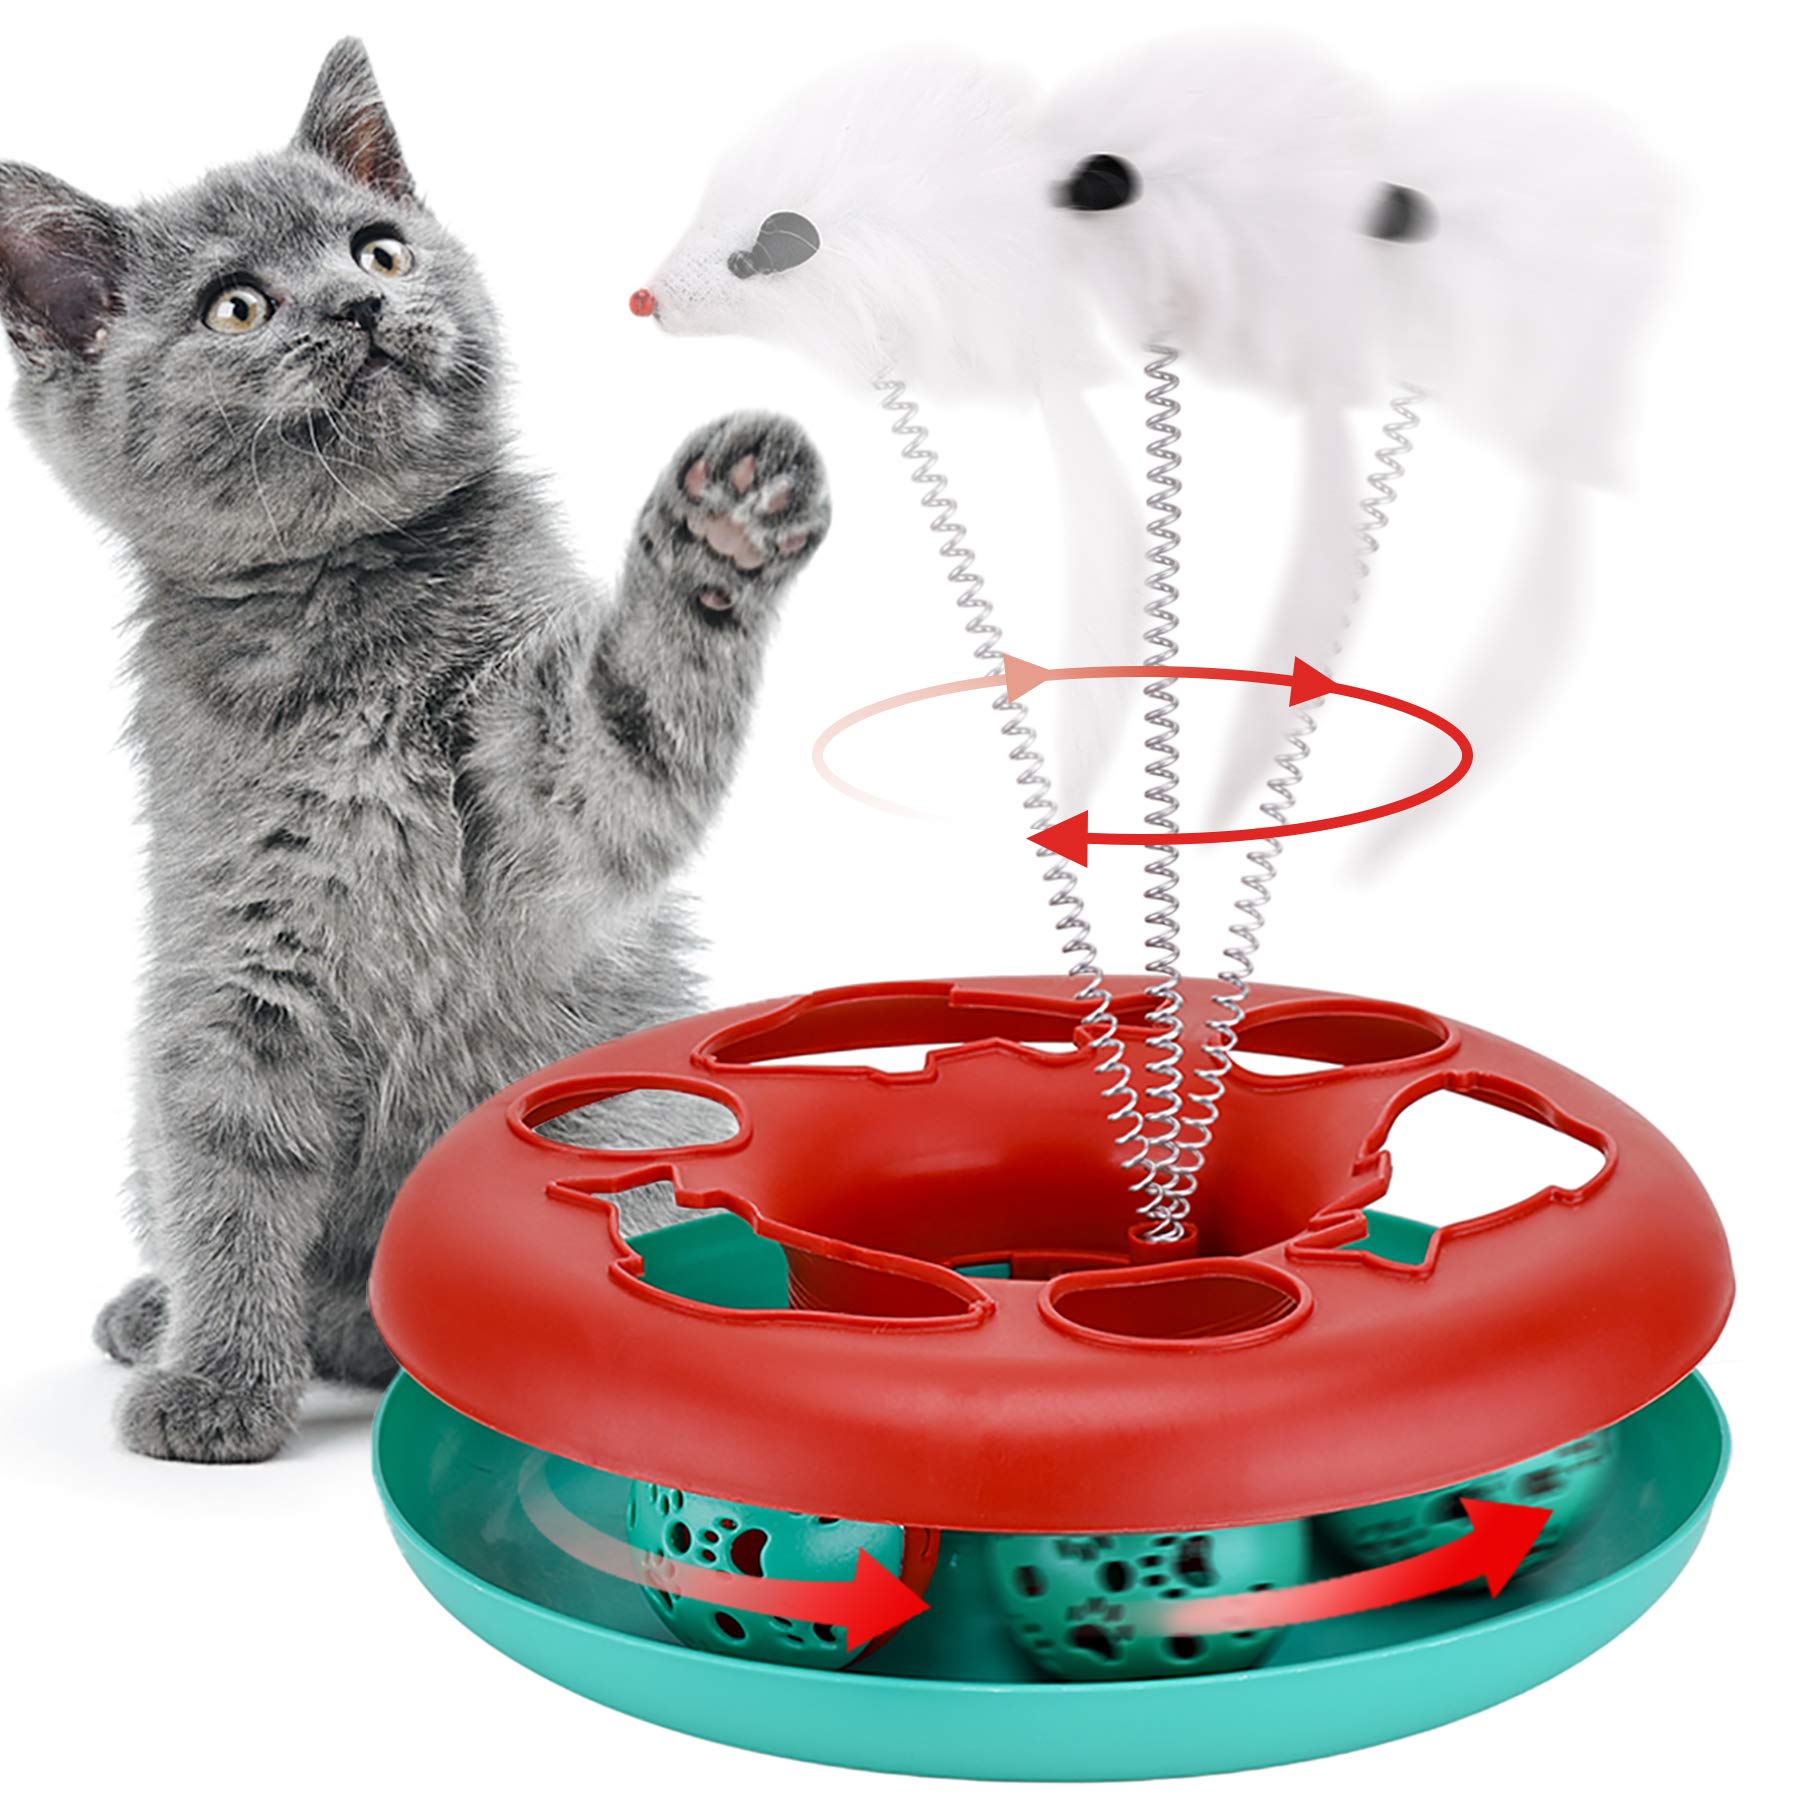 Purr-fect Playtime: Interactive Cat Toy for Endless Fun插图3